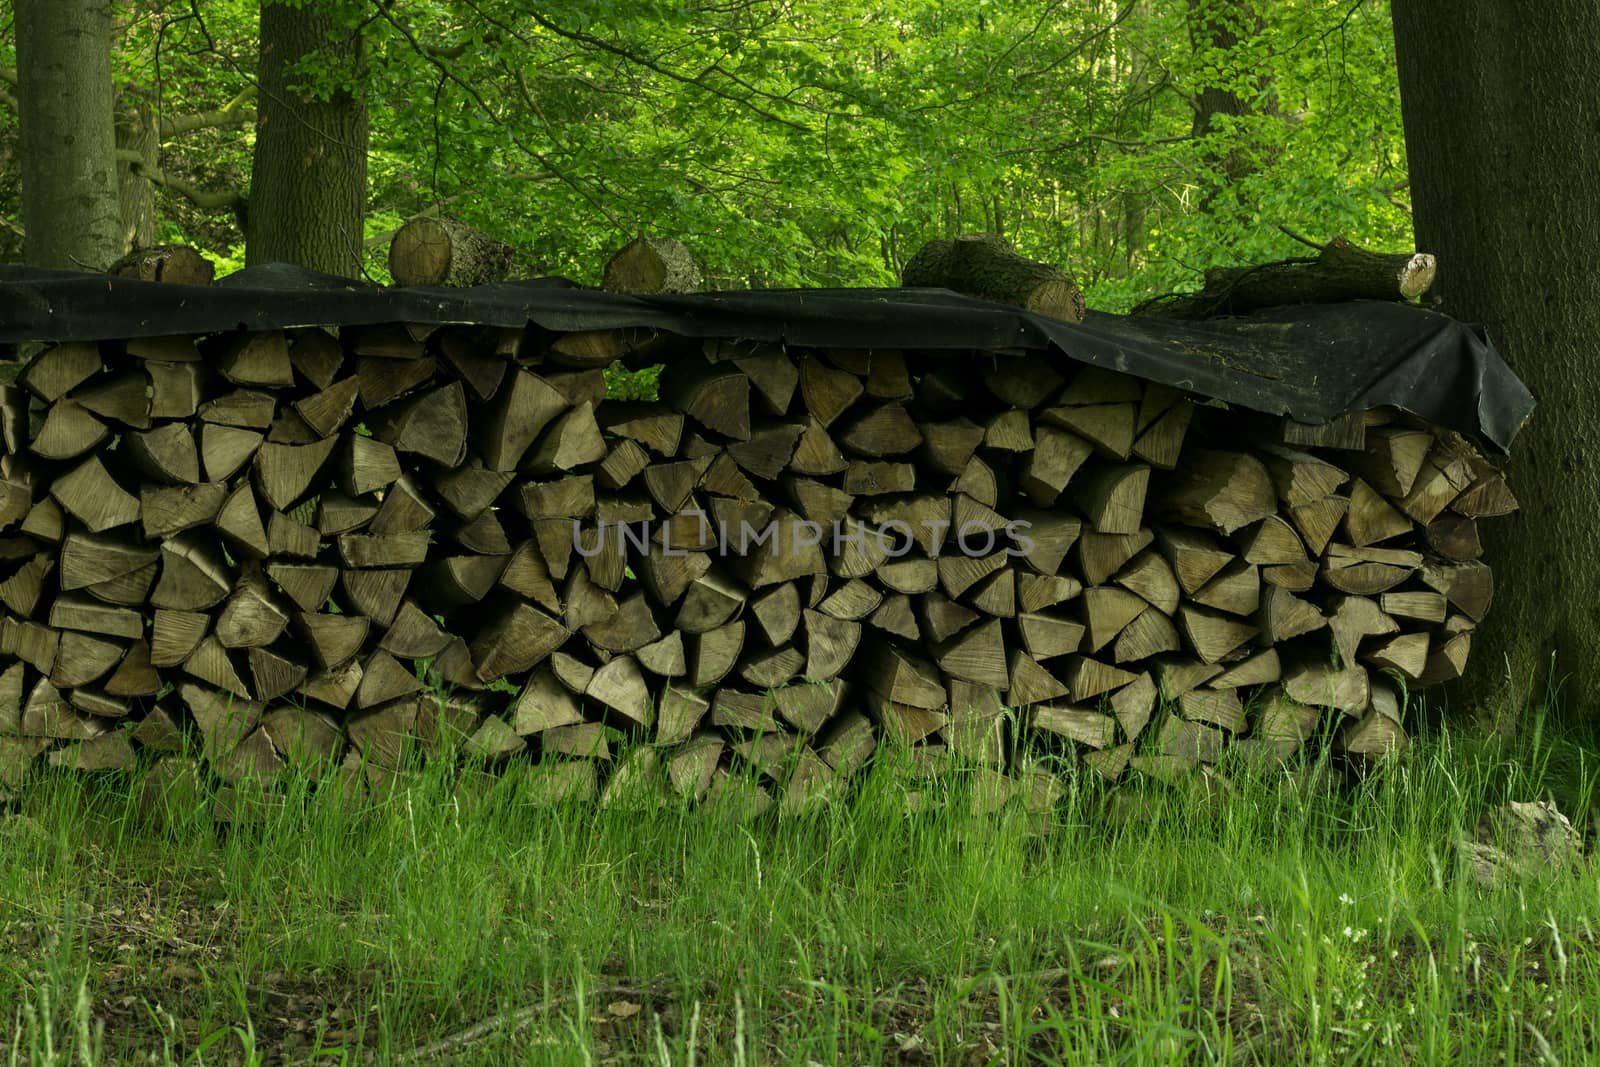 Germany: Stacked Firewood In The Forest In Lower Saxony by gstalker